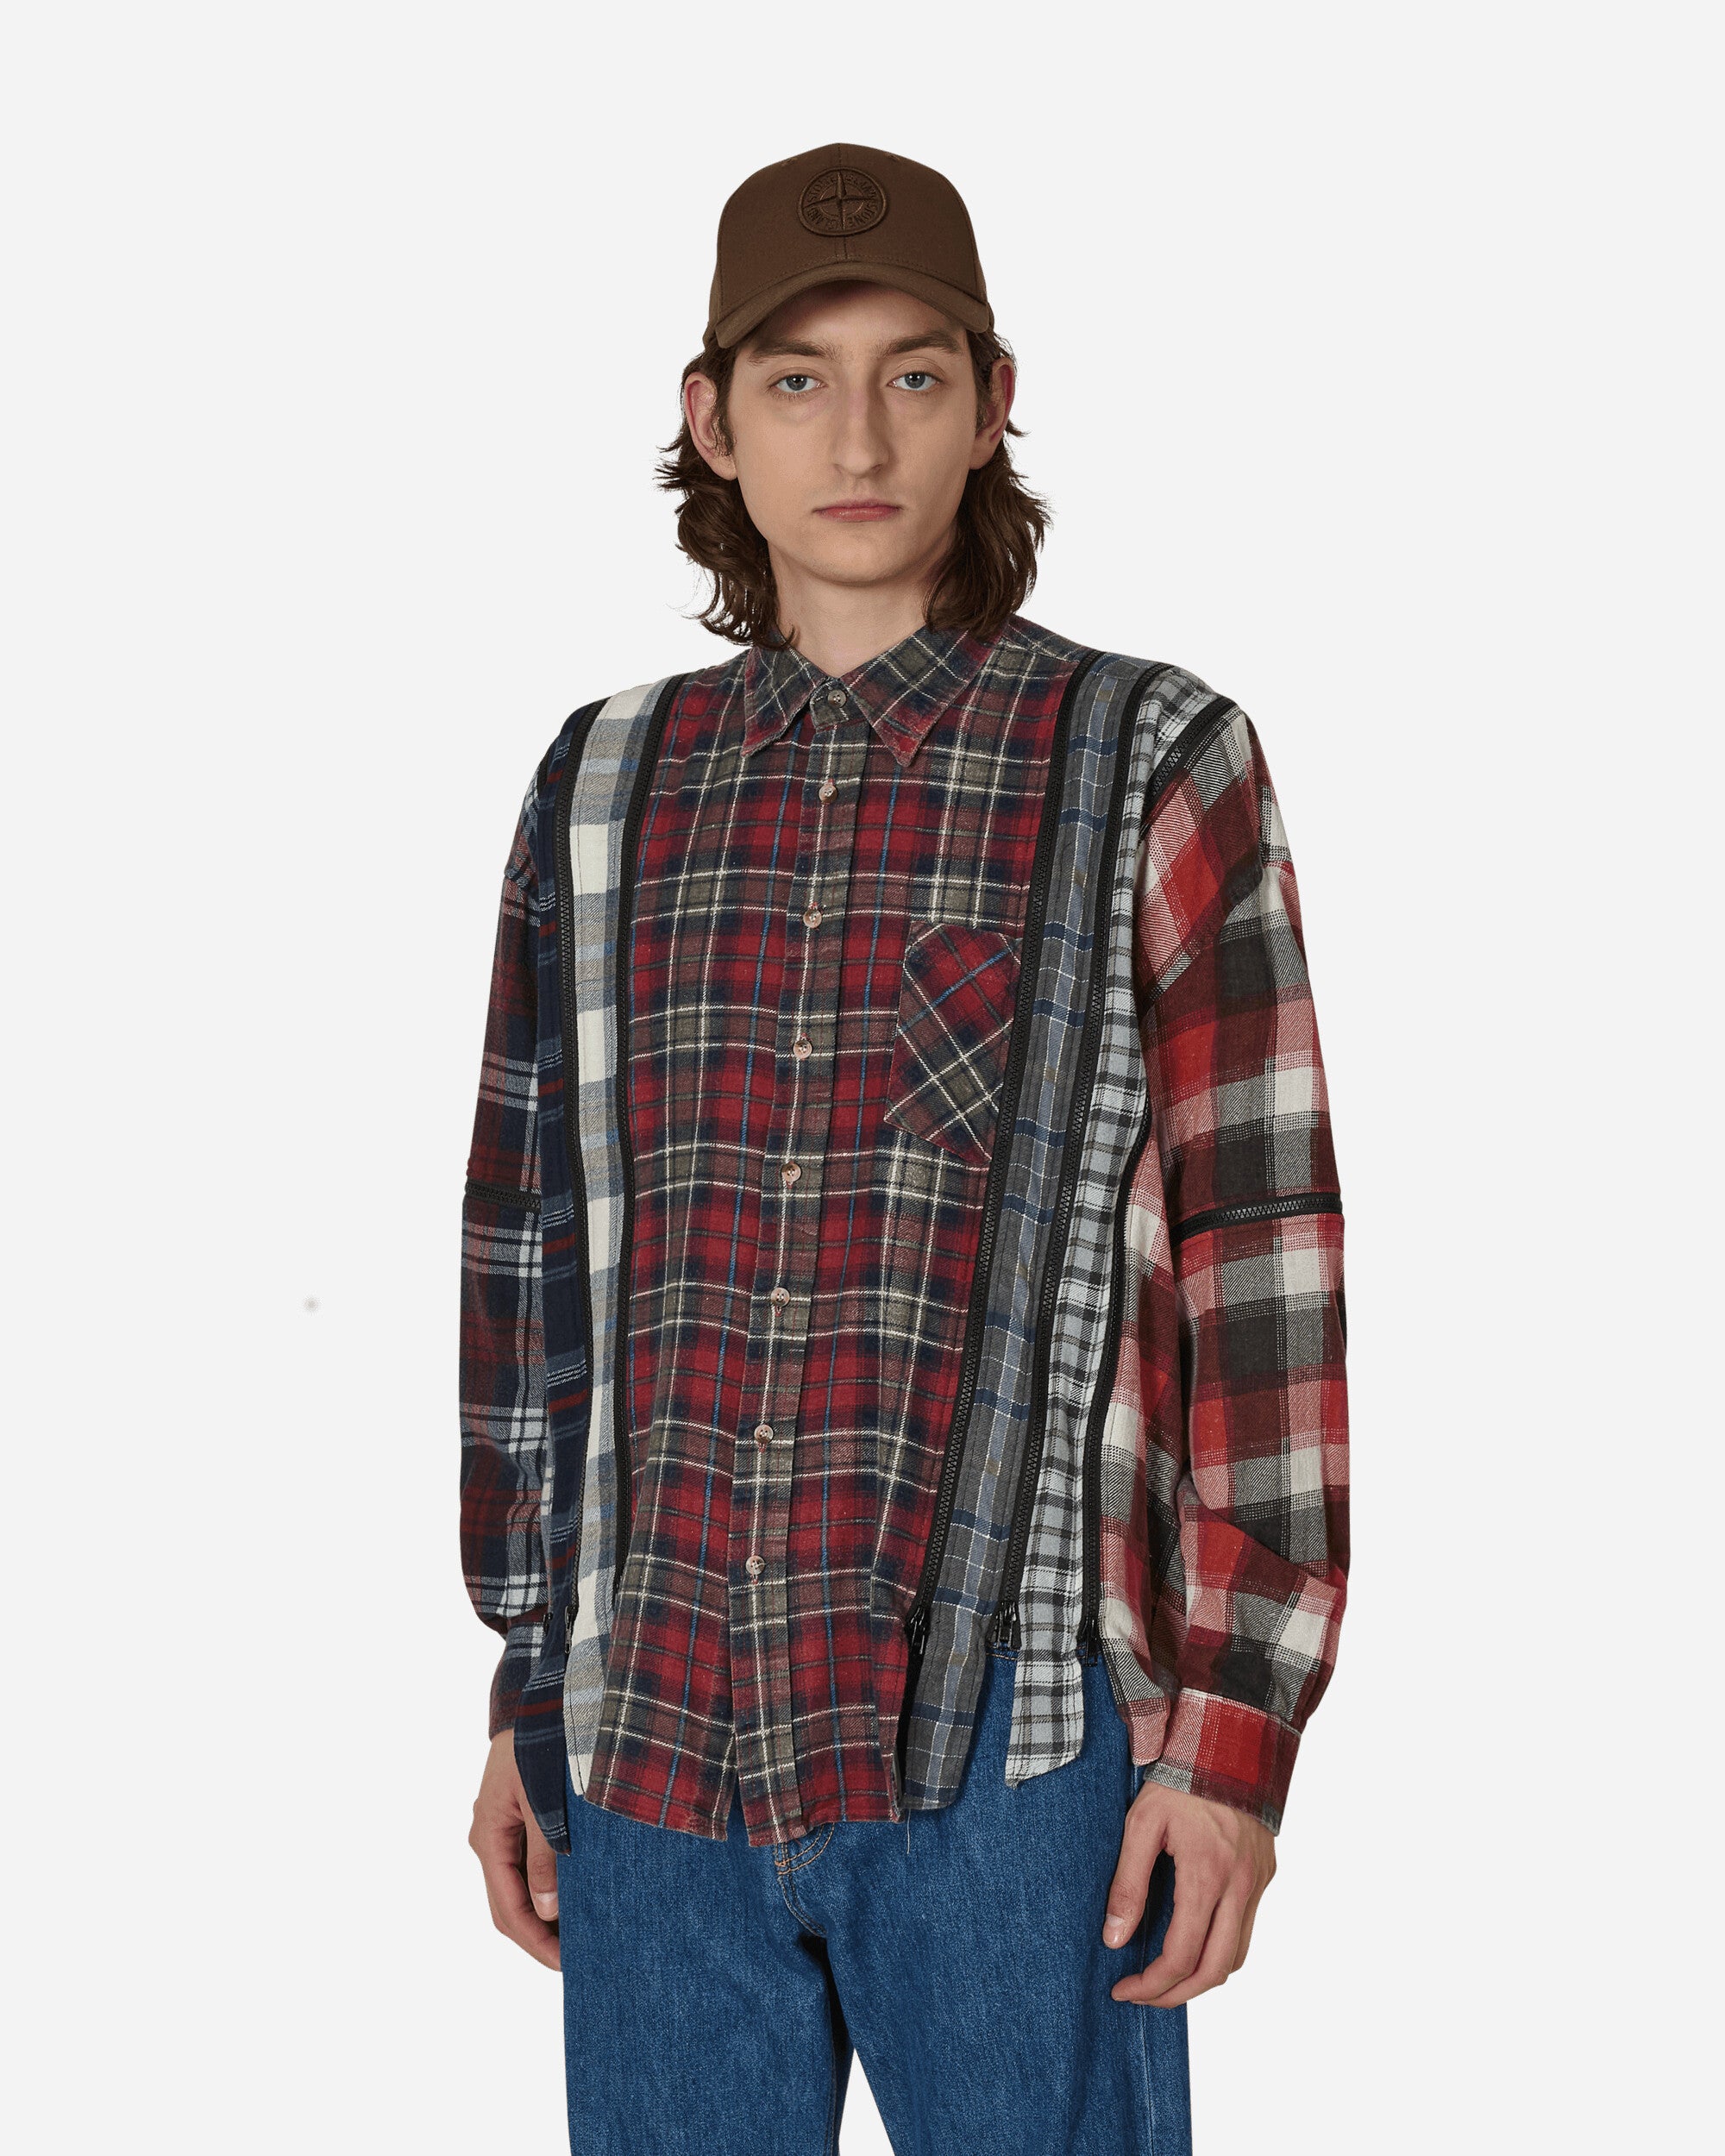 Rebuild by Needles Flannel Shirt 7 Cuts Shirt new XS red